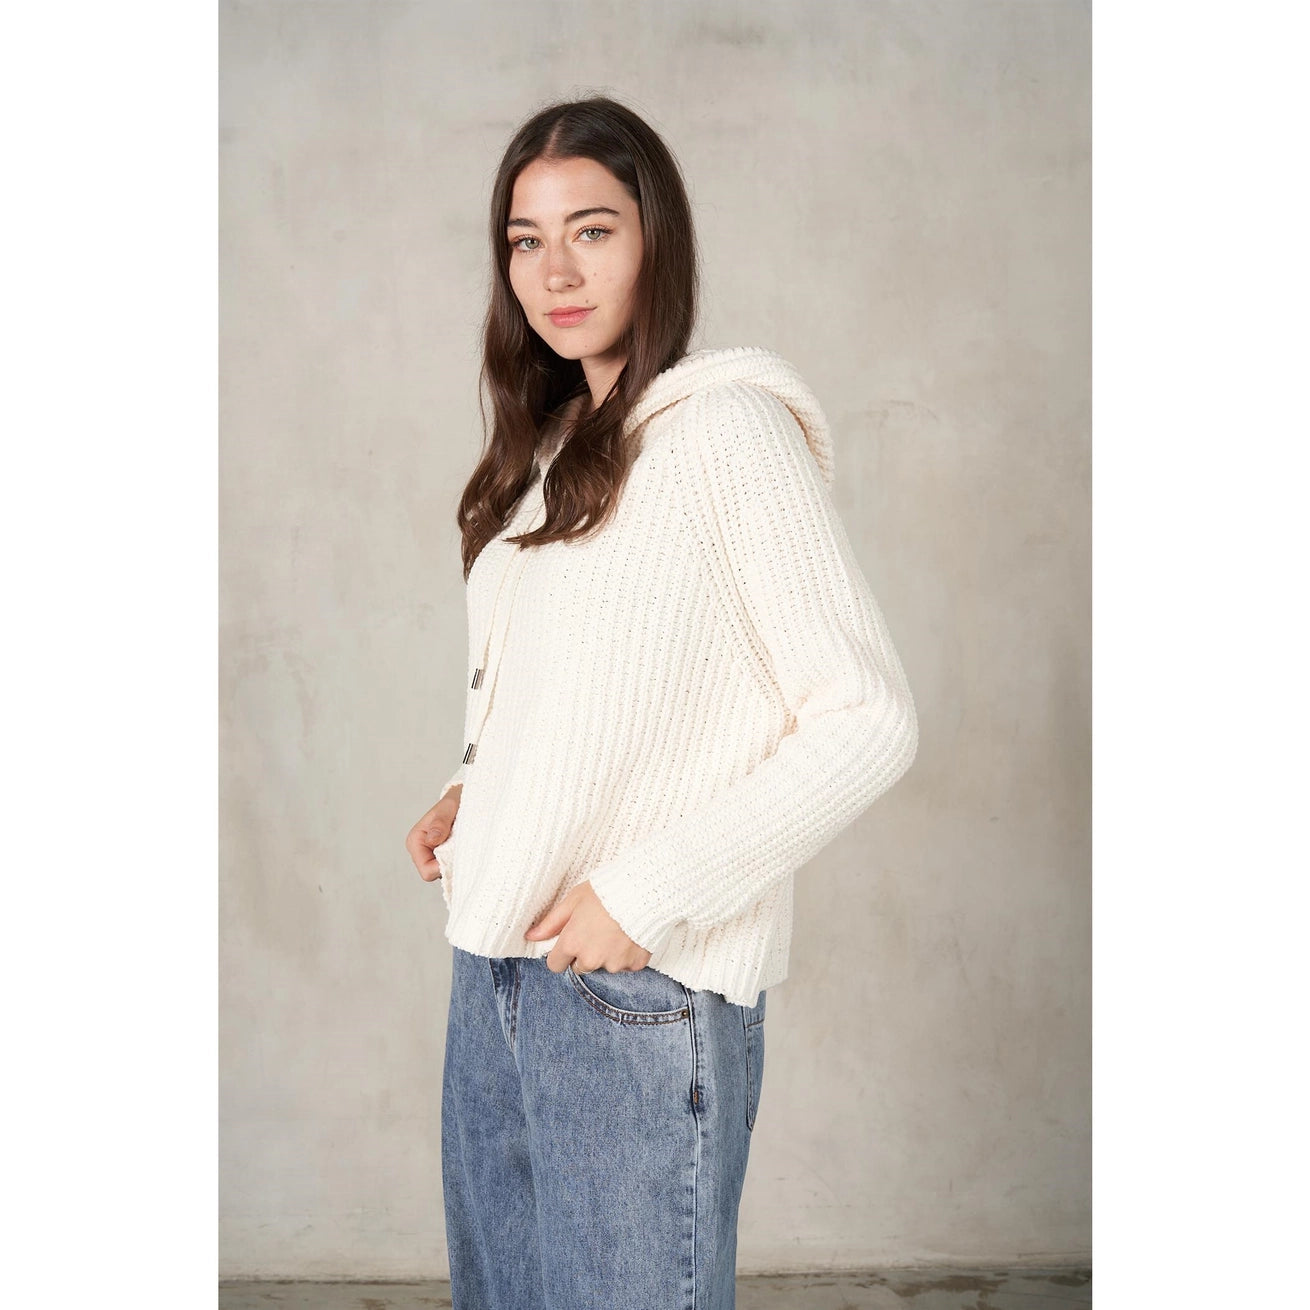 LALAMIA Hoodie Knit Sweater